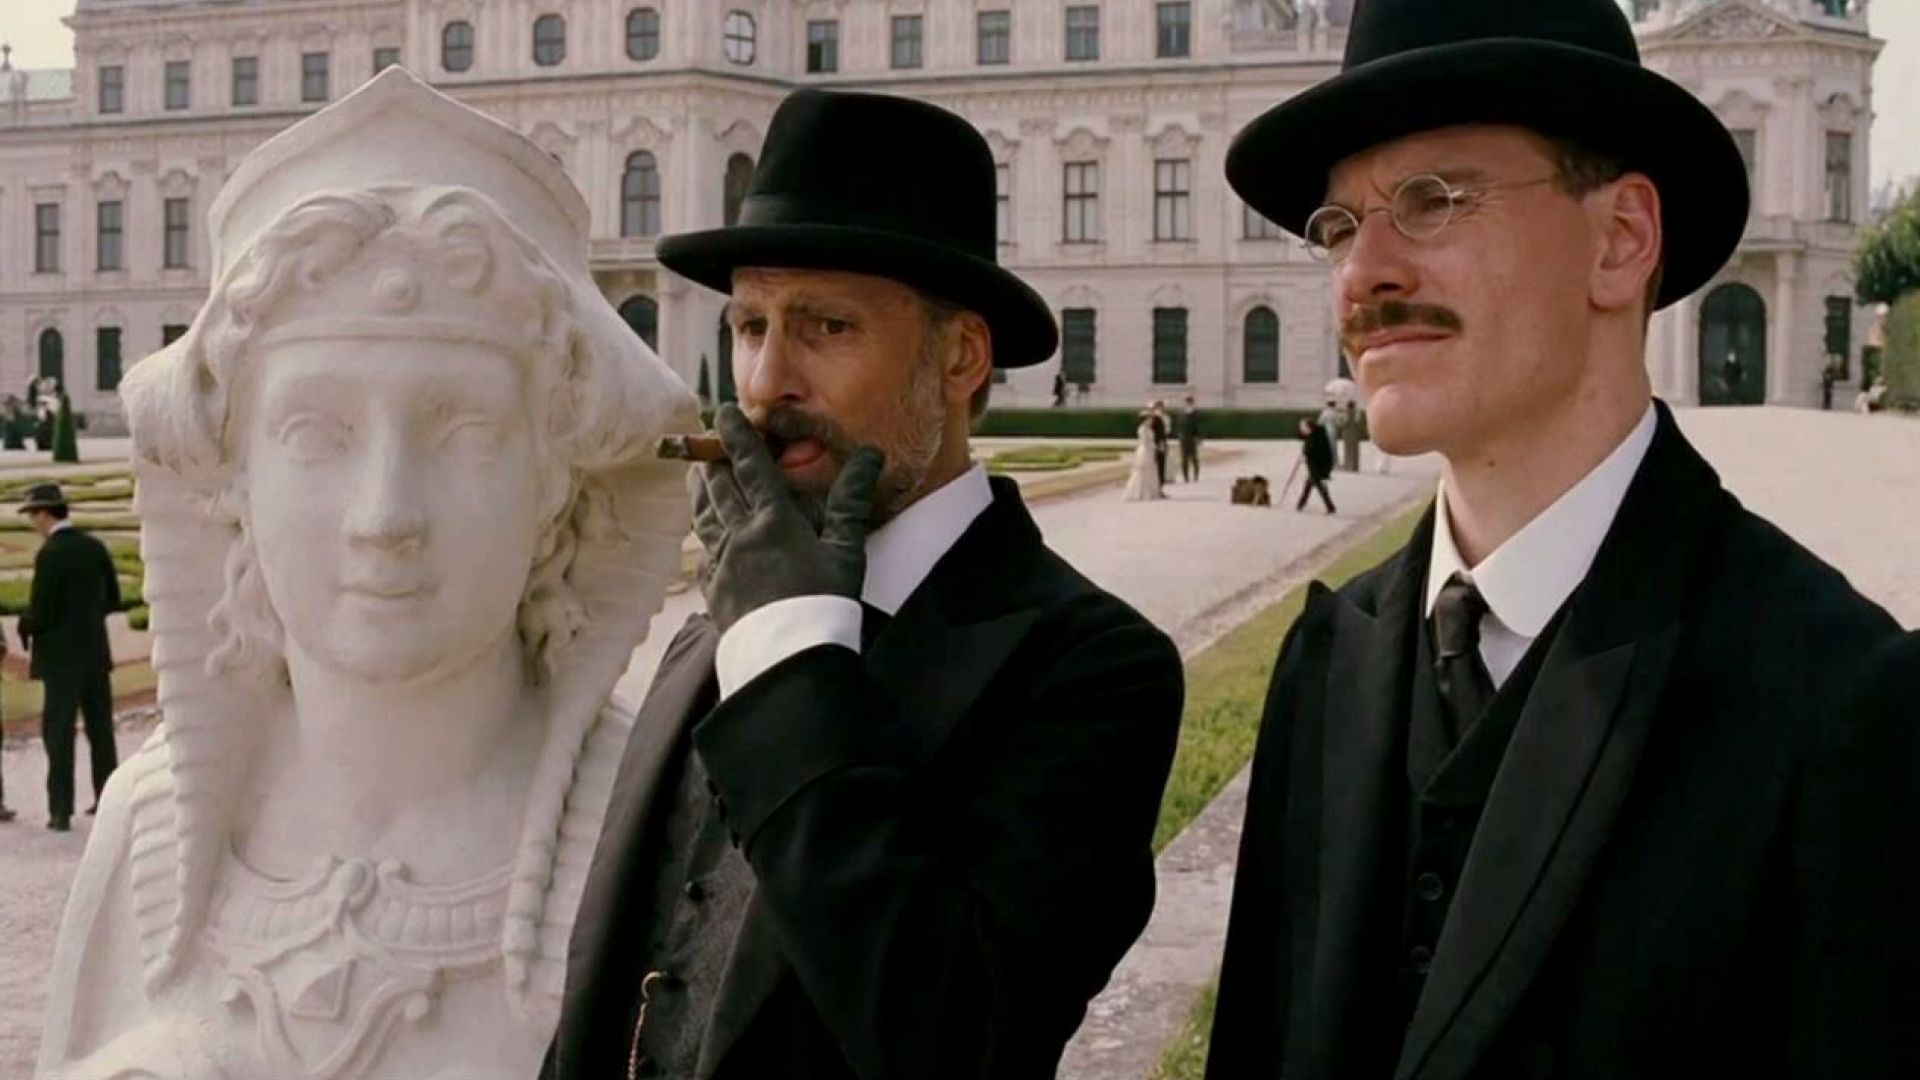 Freud and Jung discuss Otto Gross in A Dangerous Method